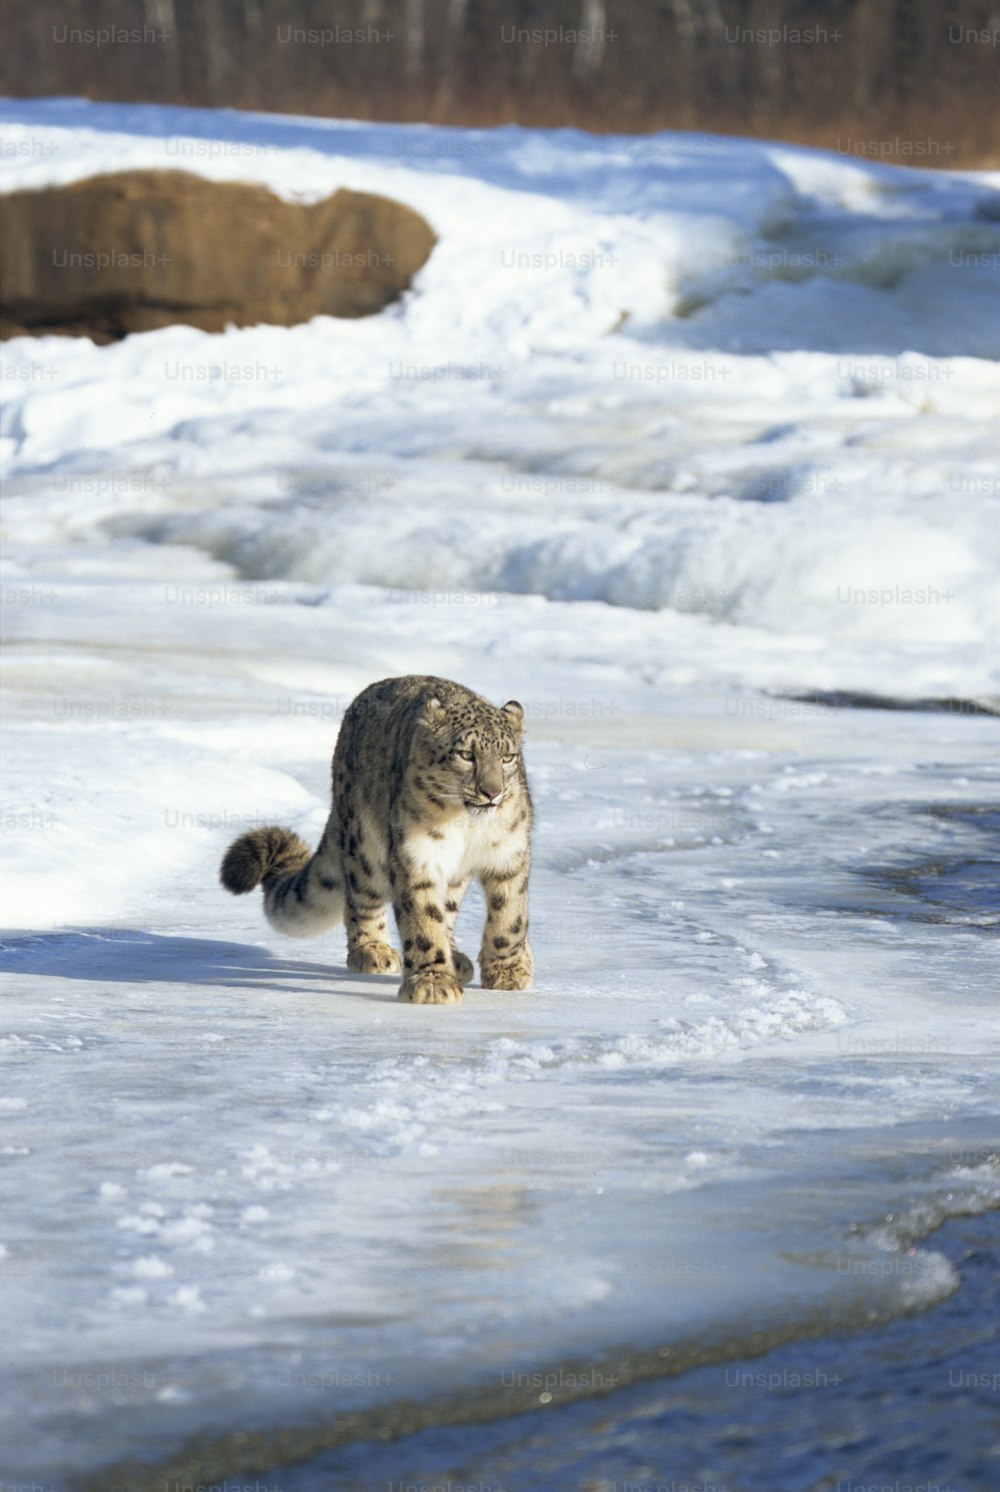 a cat walking across a snow covered ground